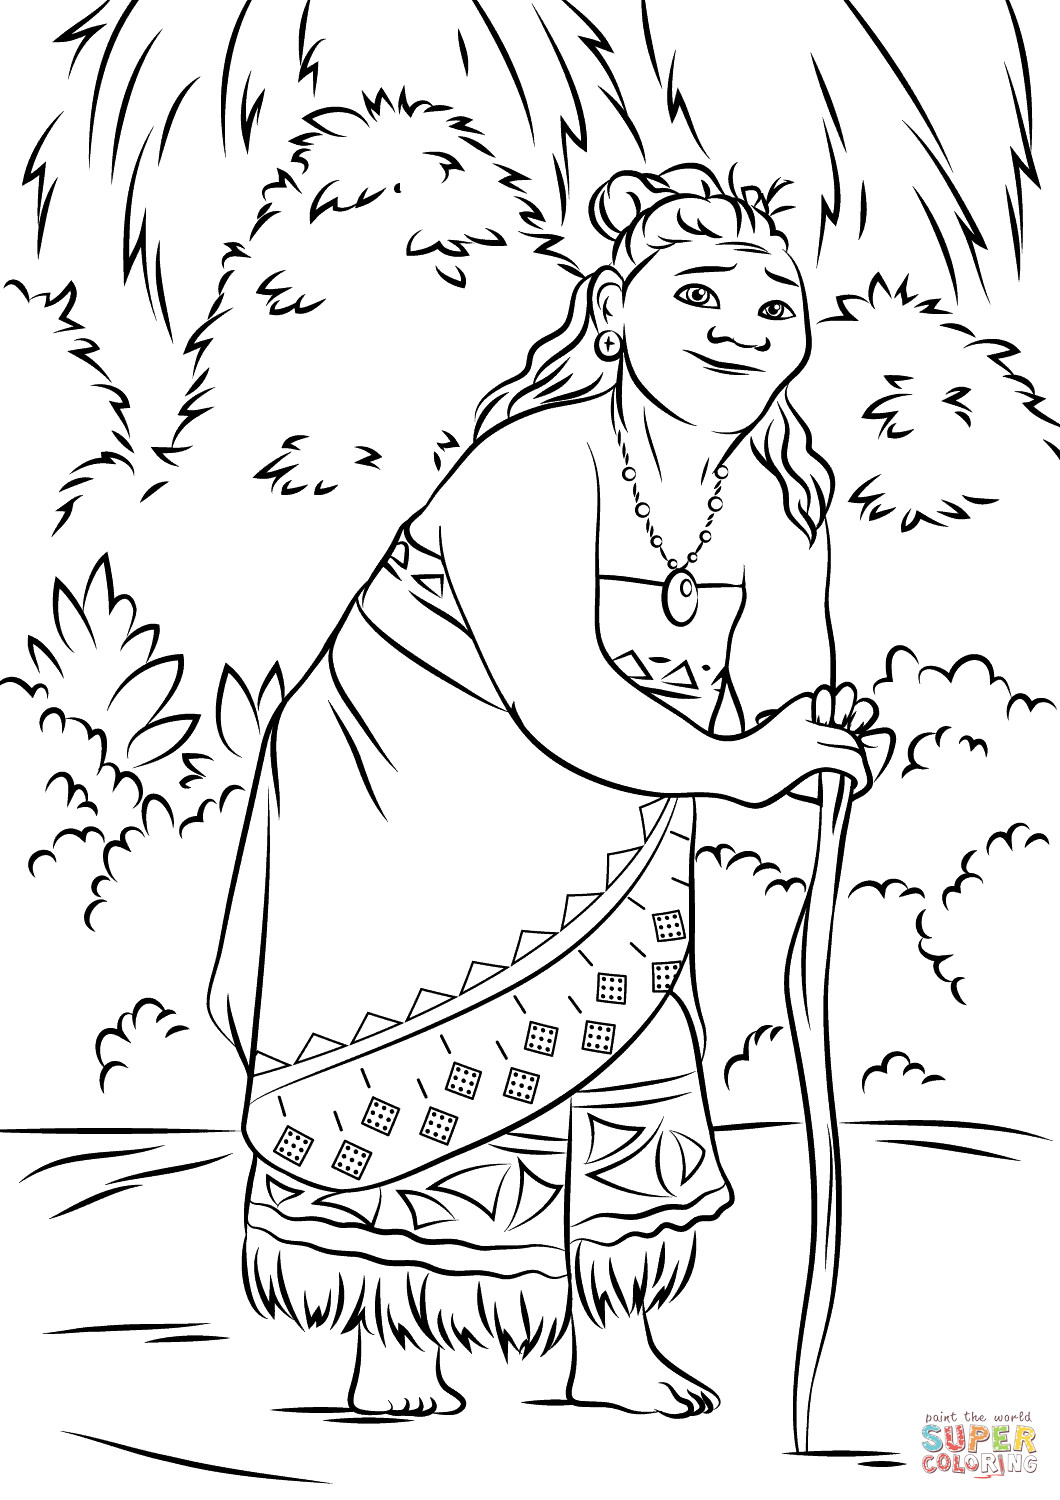 Moana Coloring Pages For Toddlers
 Moana for kids Moana Kids Coloring Pages